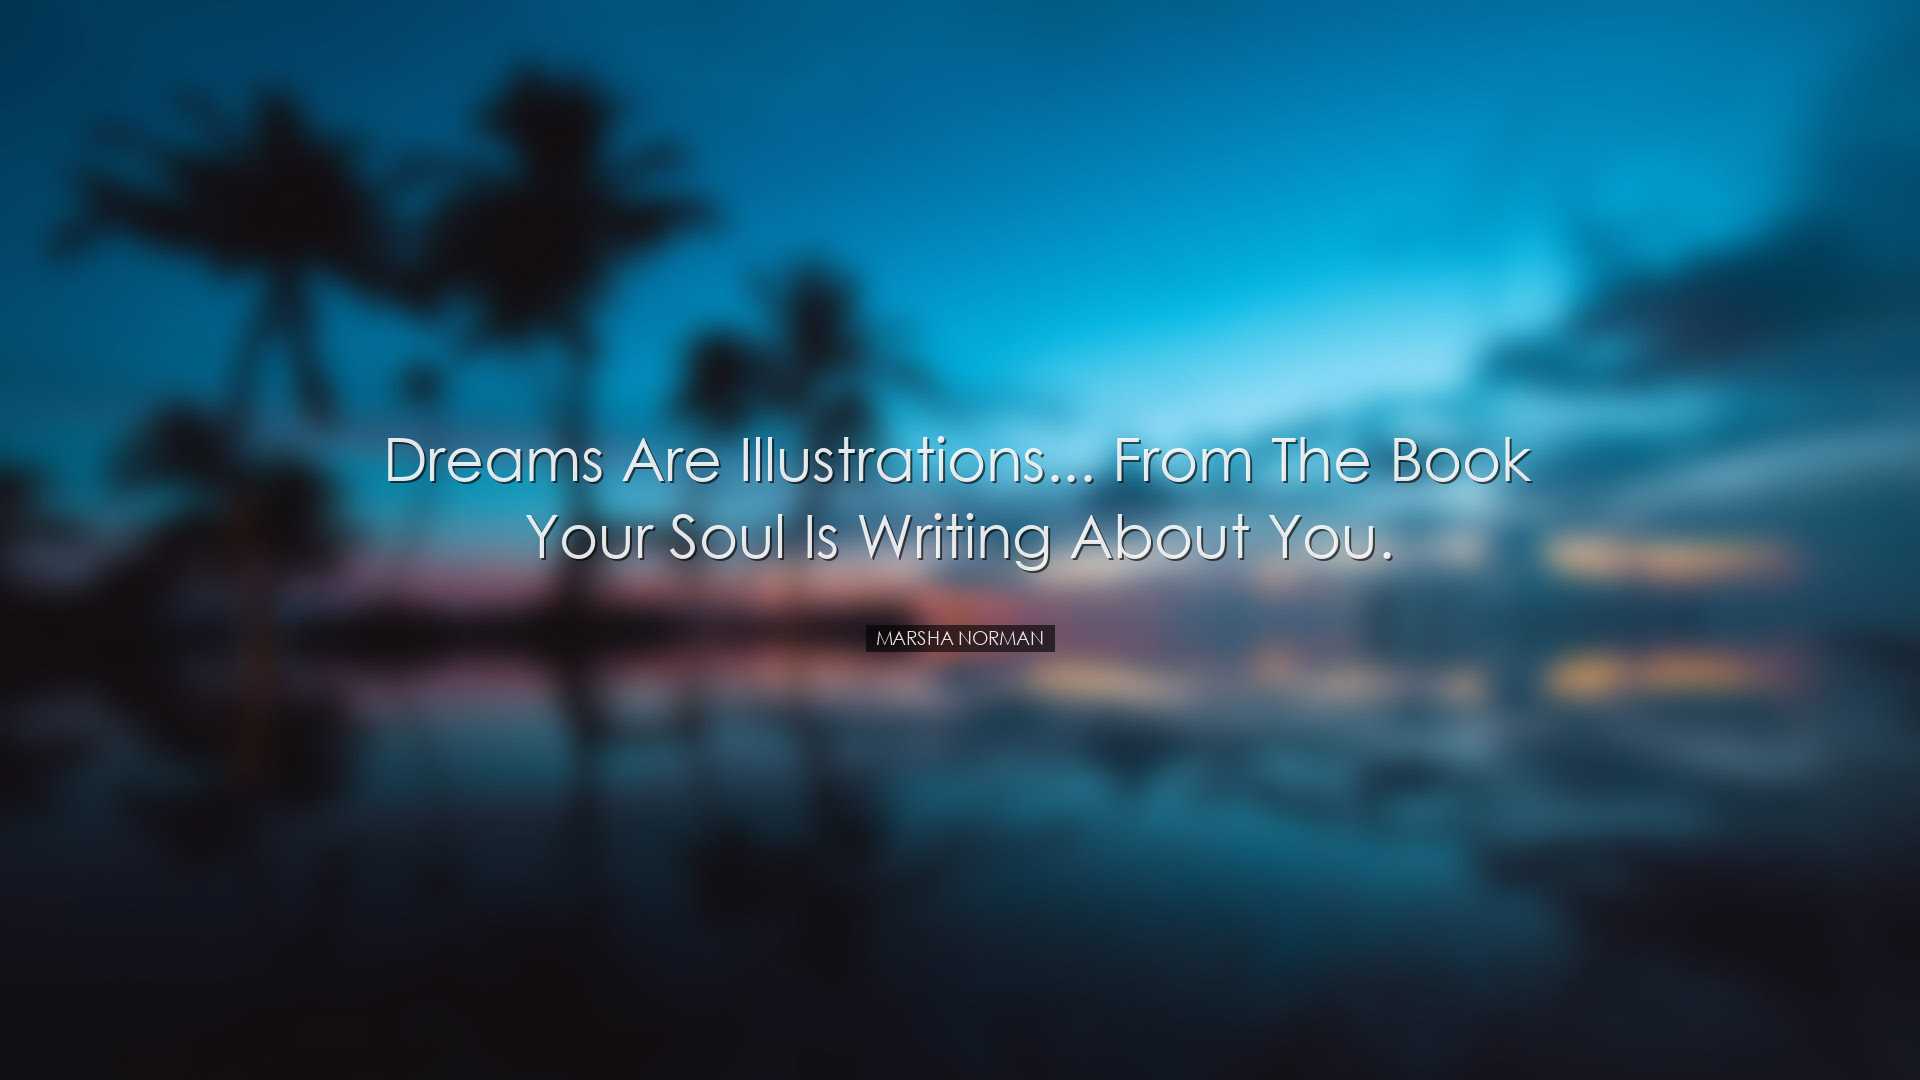 Dreams are illustrations... from the book your soul is writing abo